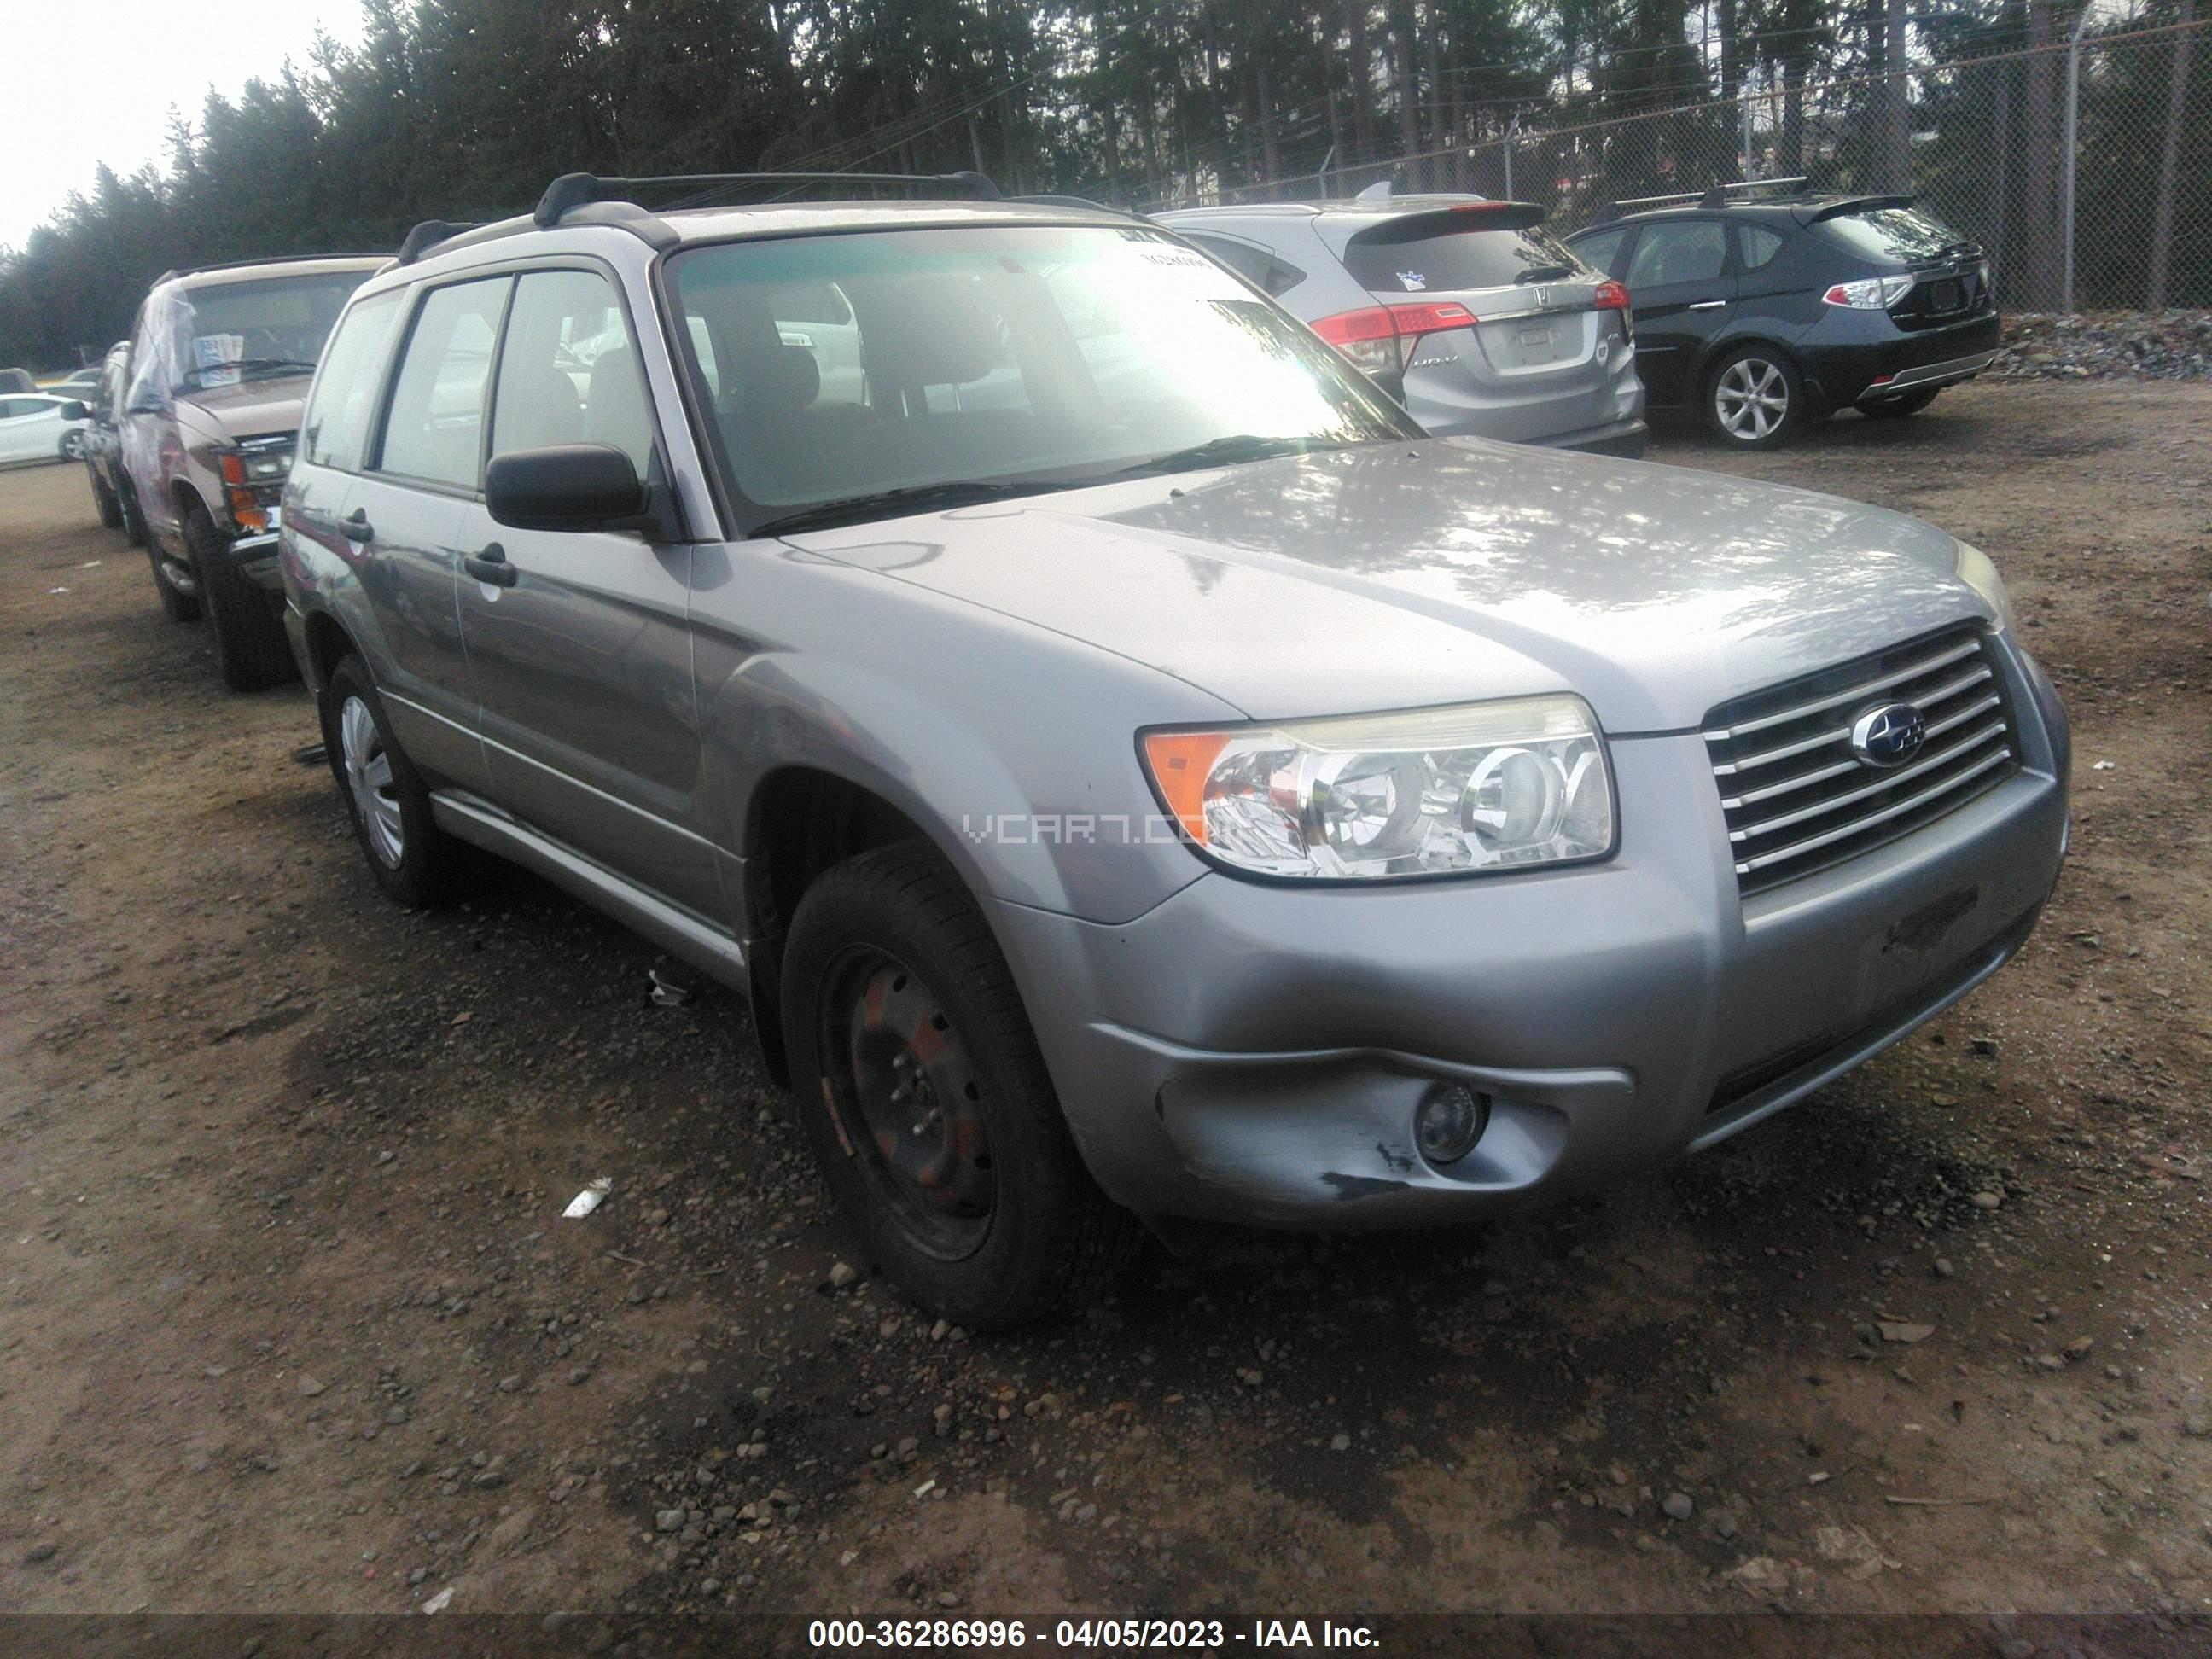 VIN: JF1SG63648H708942 - subaru forester